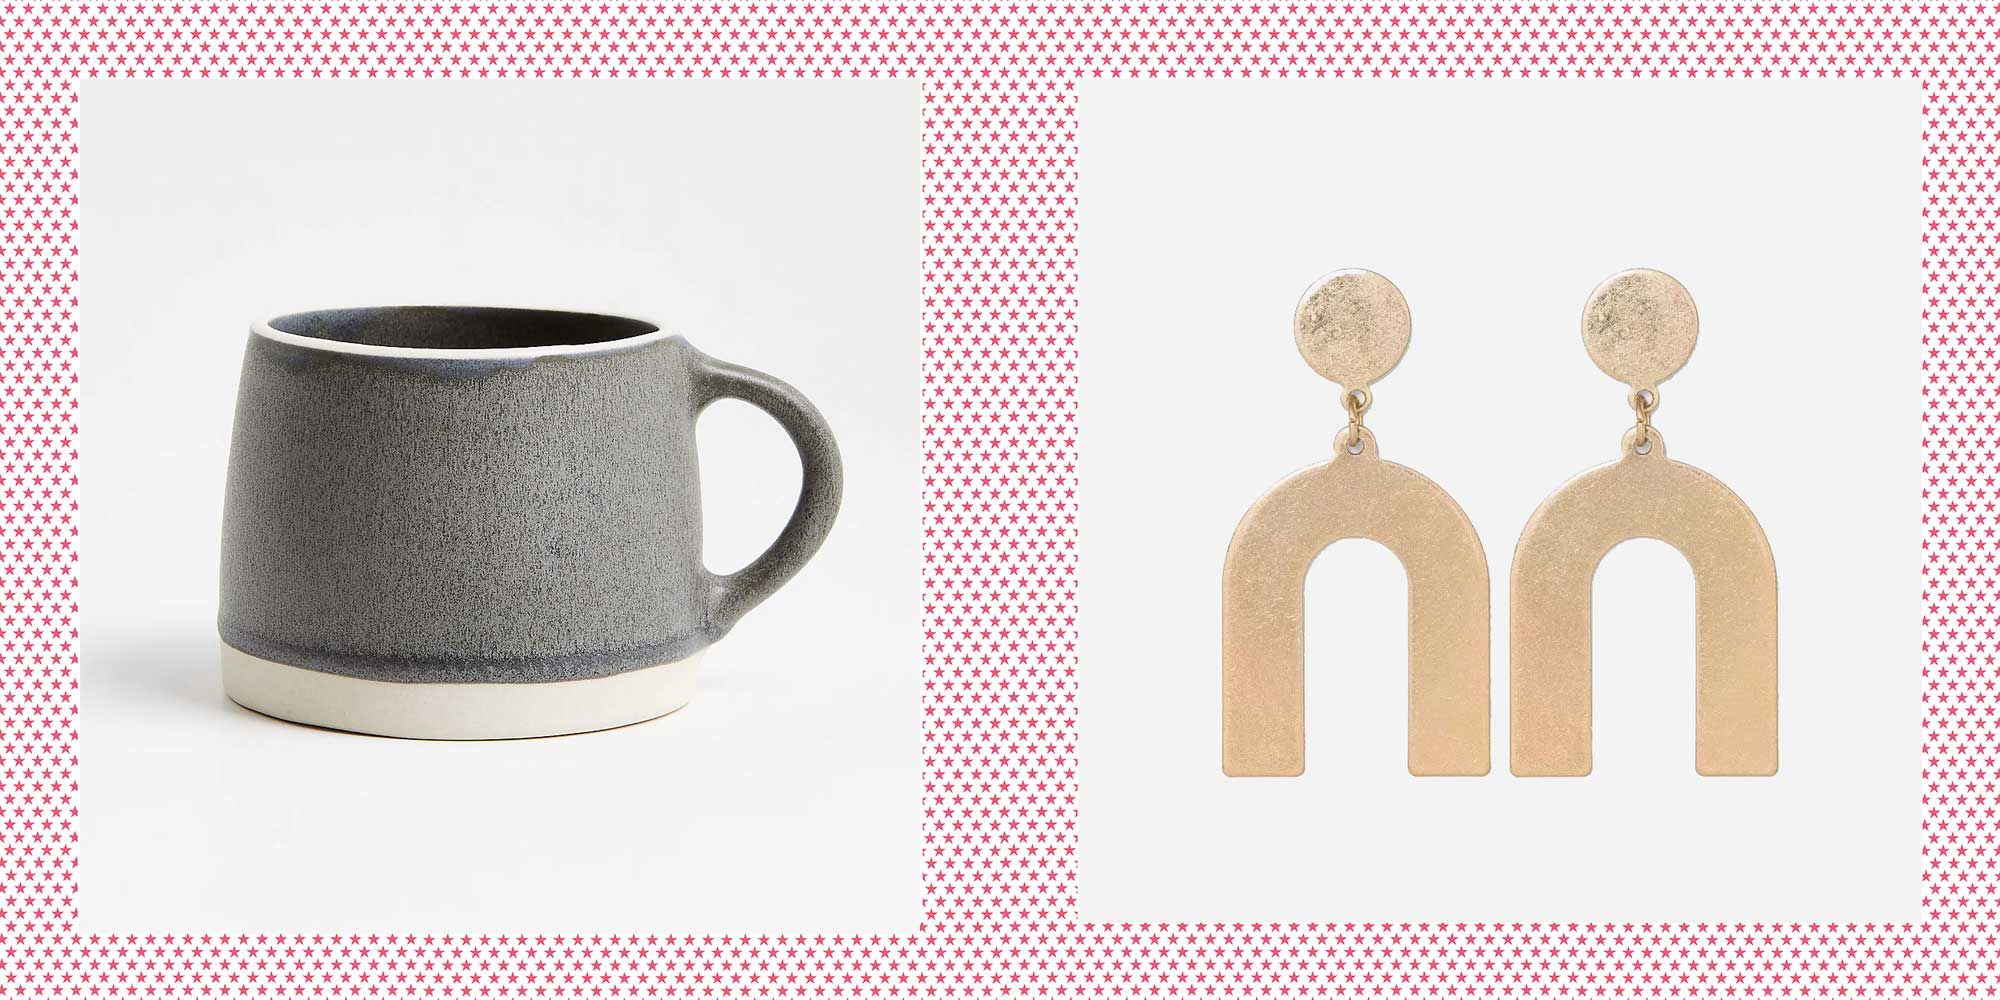 21 Gifts For Her Under $10 - Saving & Simplicity